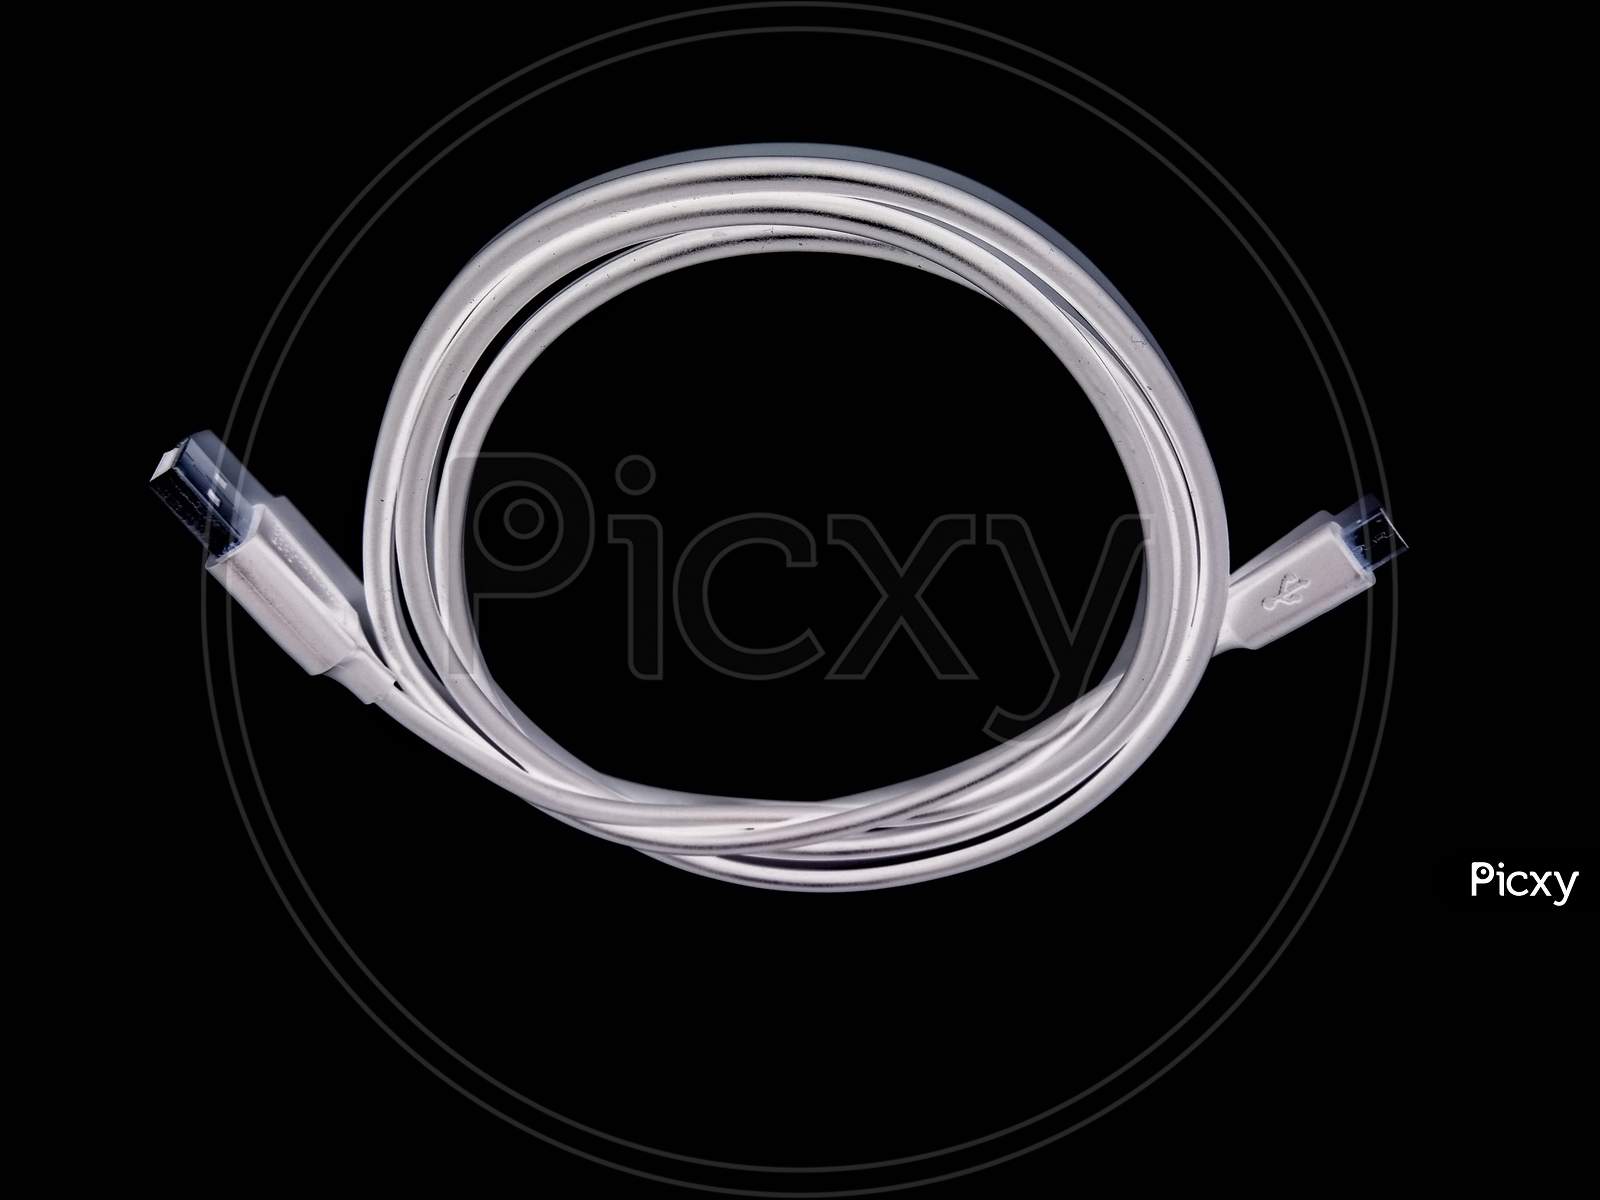 A picture of usb cable